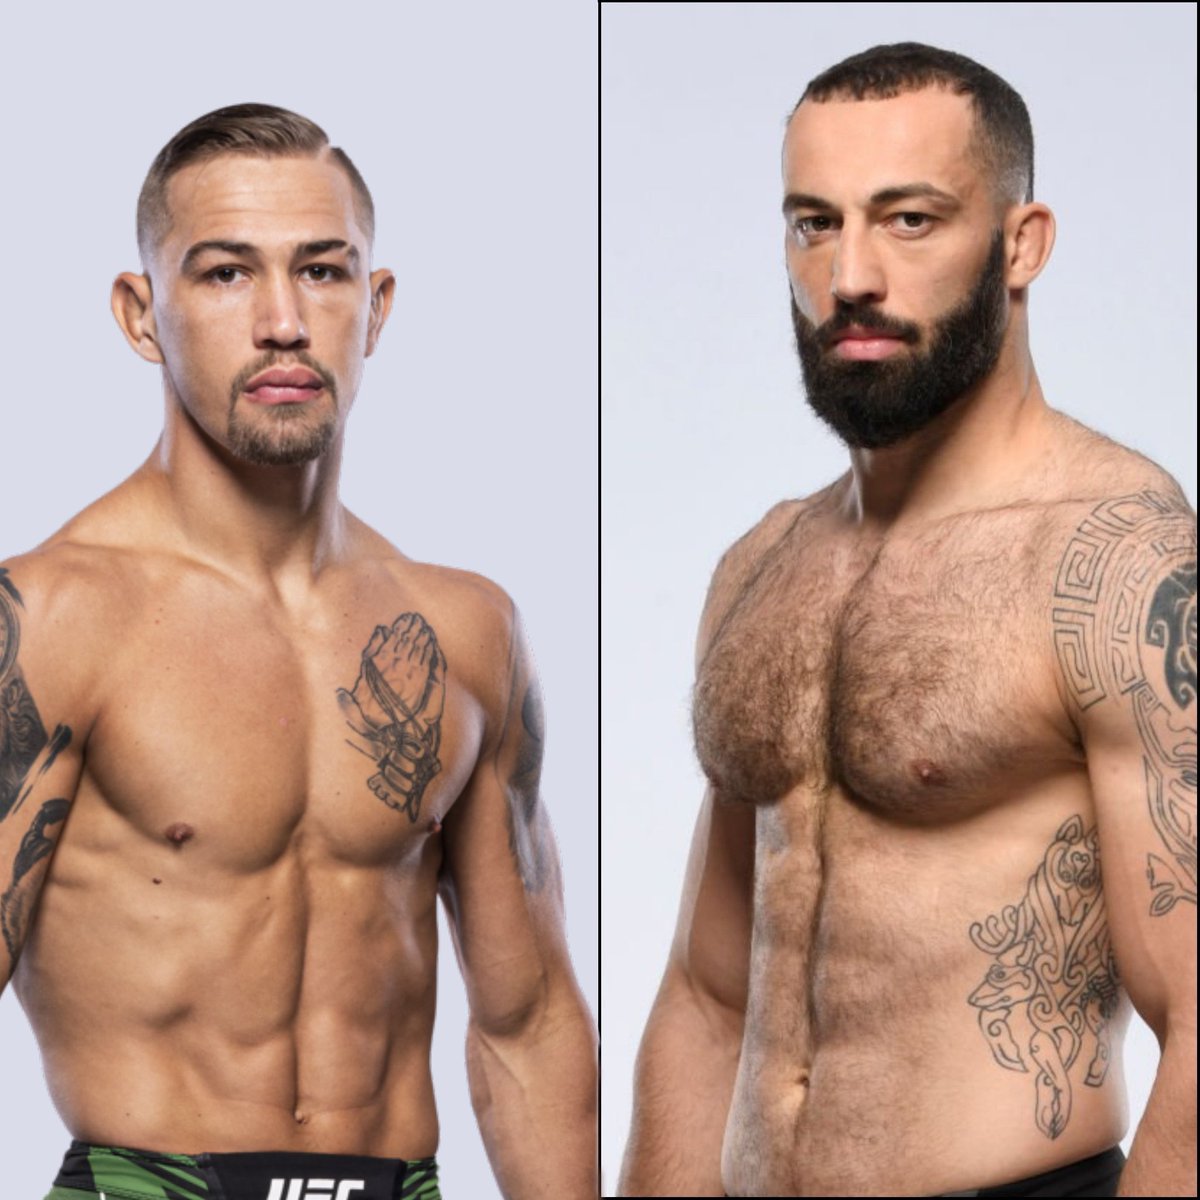 🚨🚨BREAKING NEWS 🚨🚨

N.Imavov out. JP Buys in, will fight Roman Dolidze at #UFCVegas85 on February 2nd. #UFC #MMA #UFCESPN #UFC2024